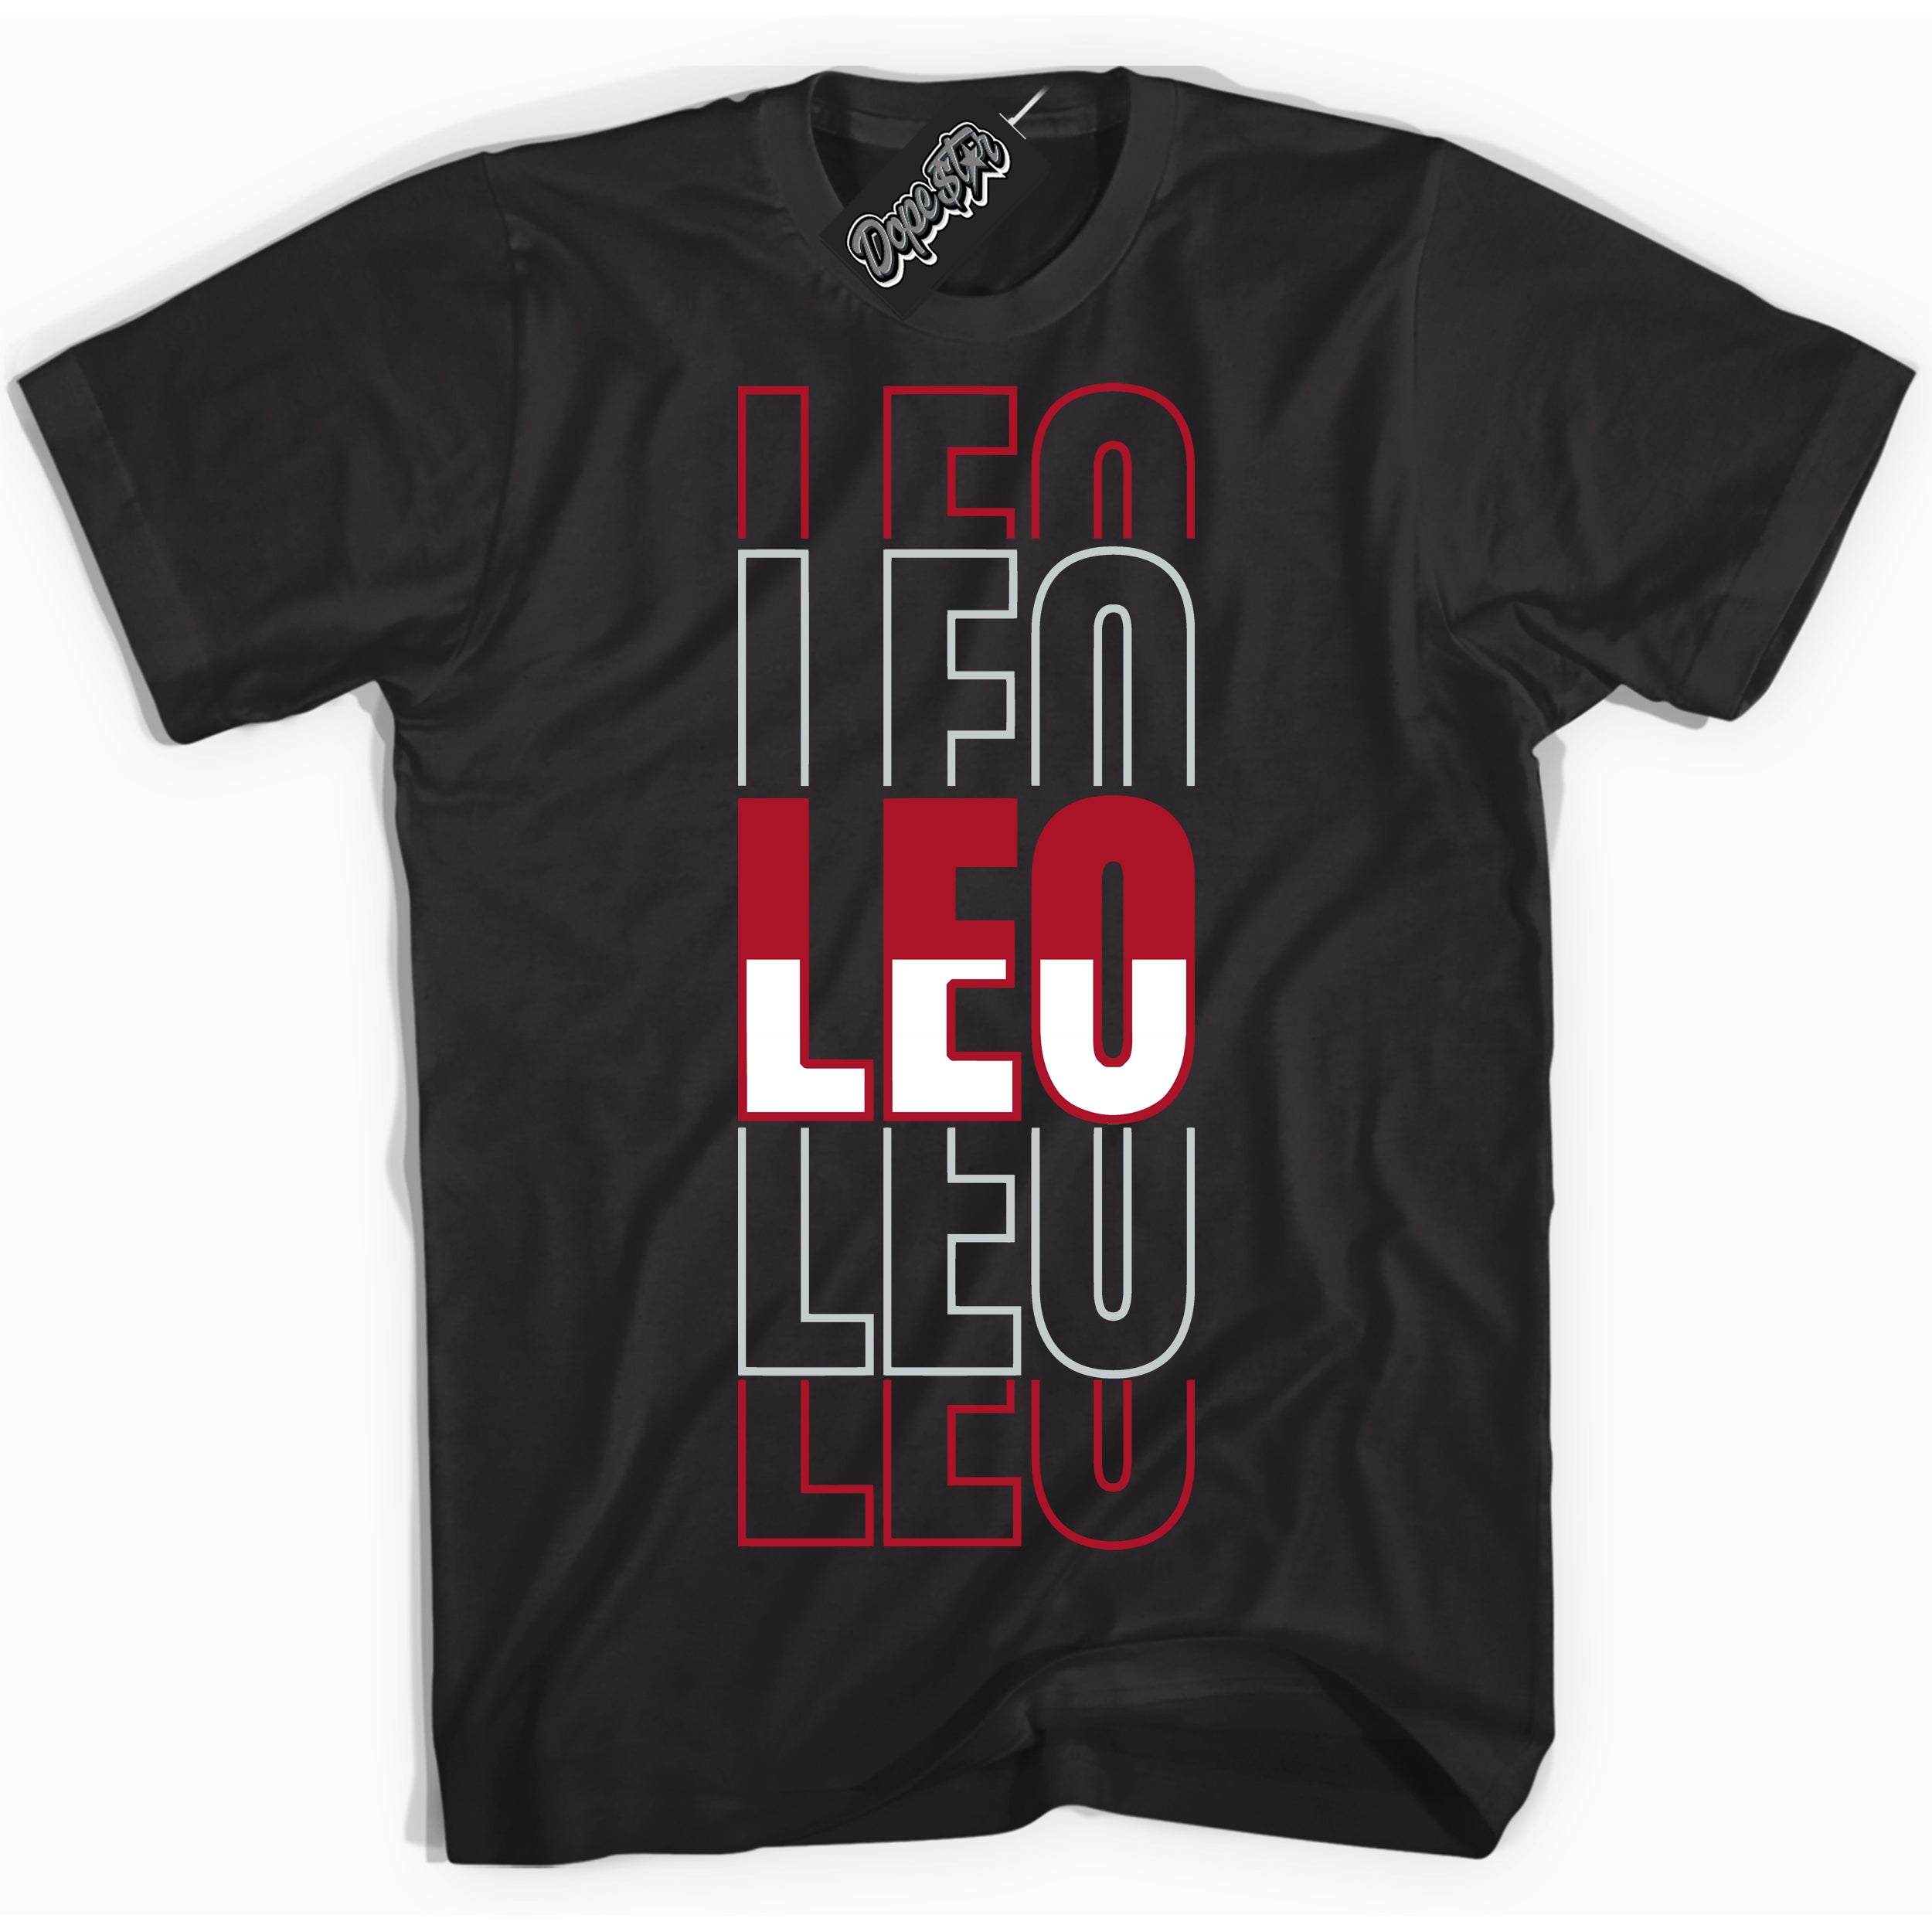 Cool Black Shirt with “ Leo” design that perfectly matches Reverse Ultraman Sneakers.